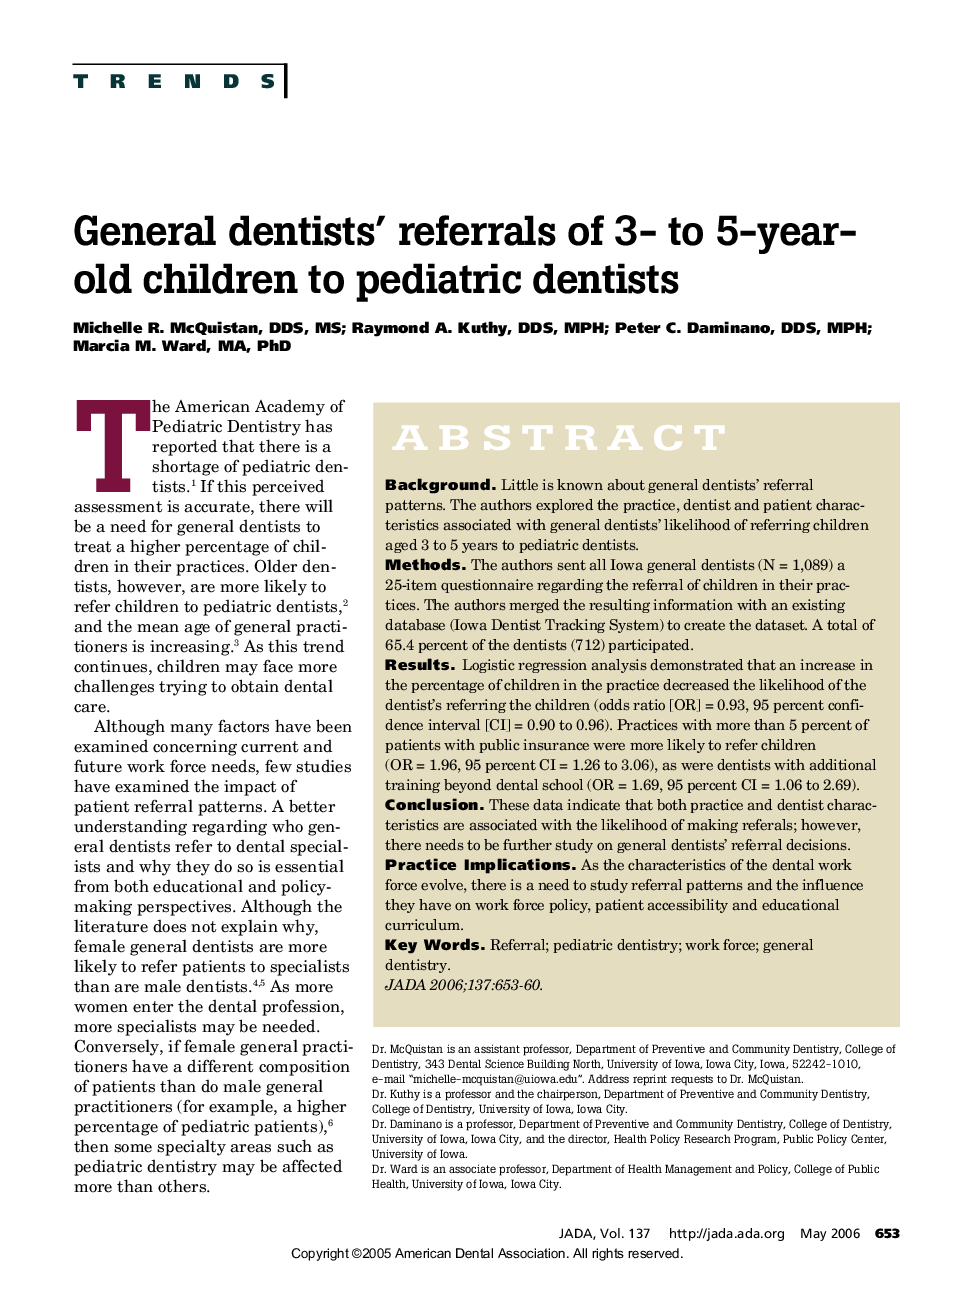 General dentists' referrals of 3- to 5-year-old children to pediatric dentists